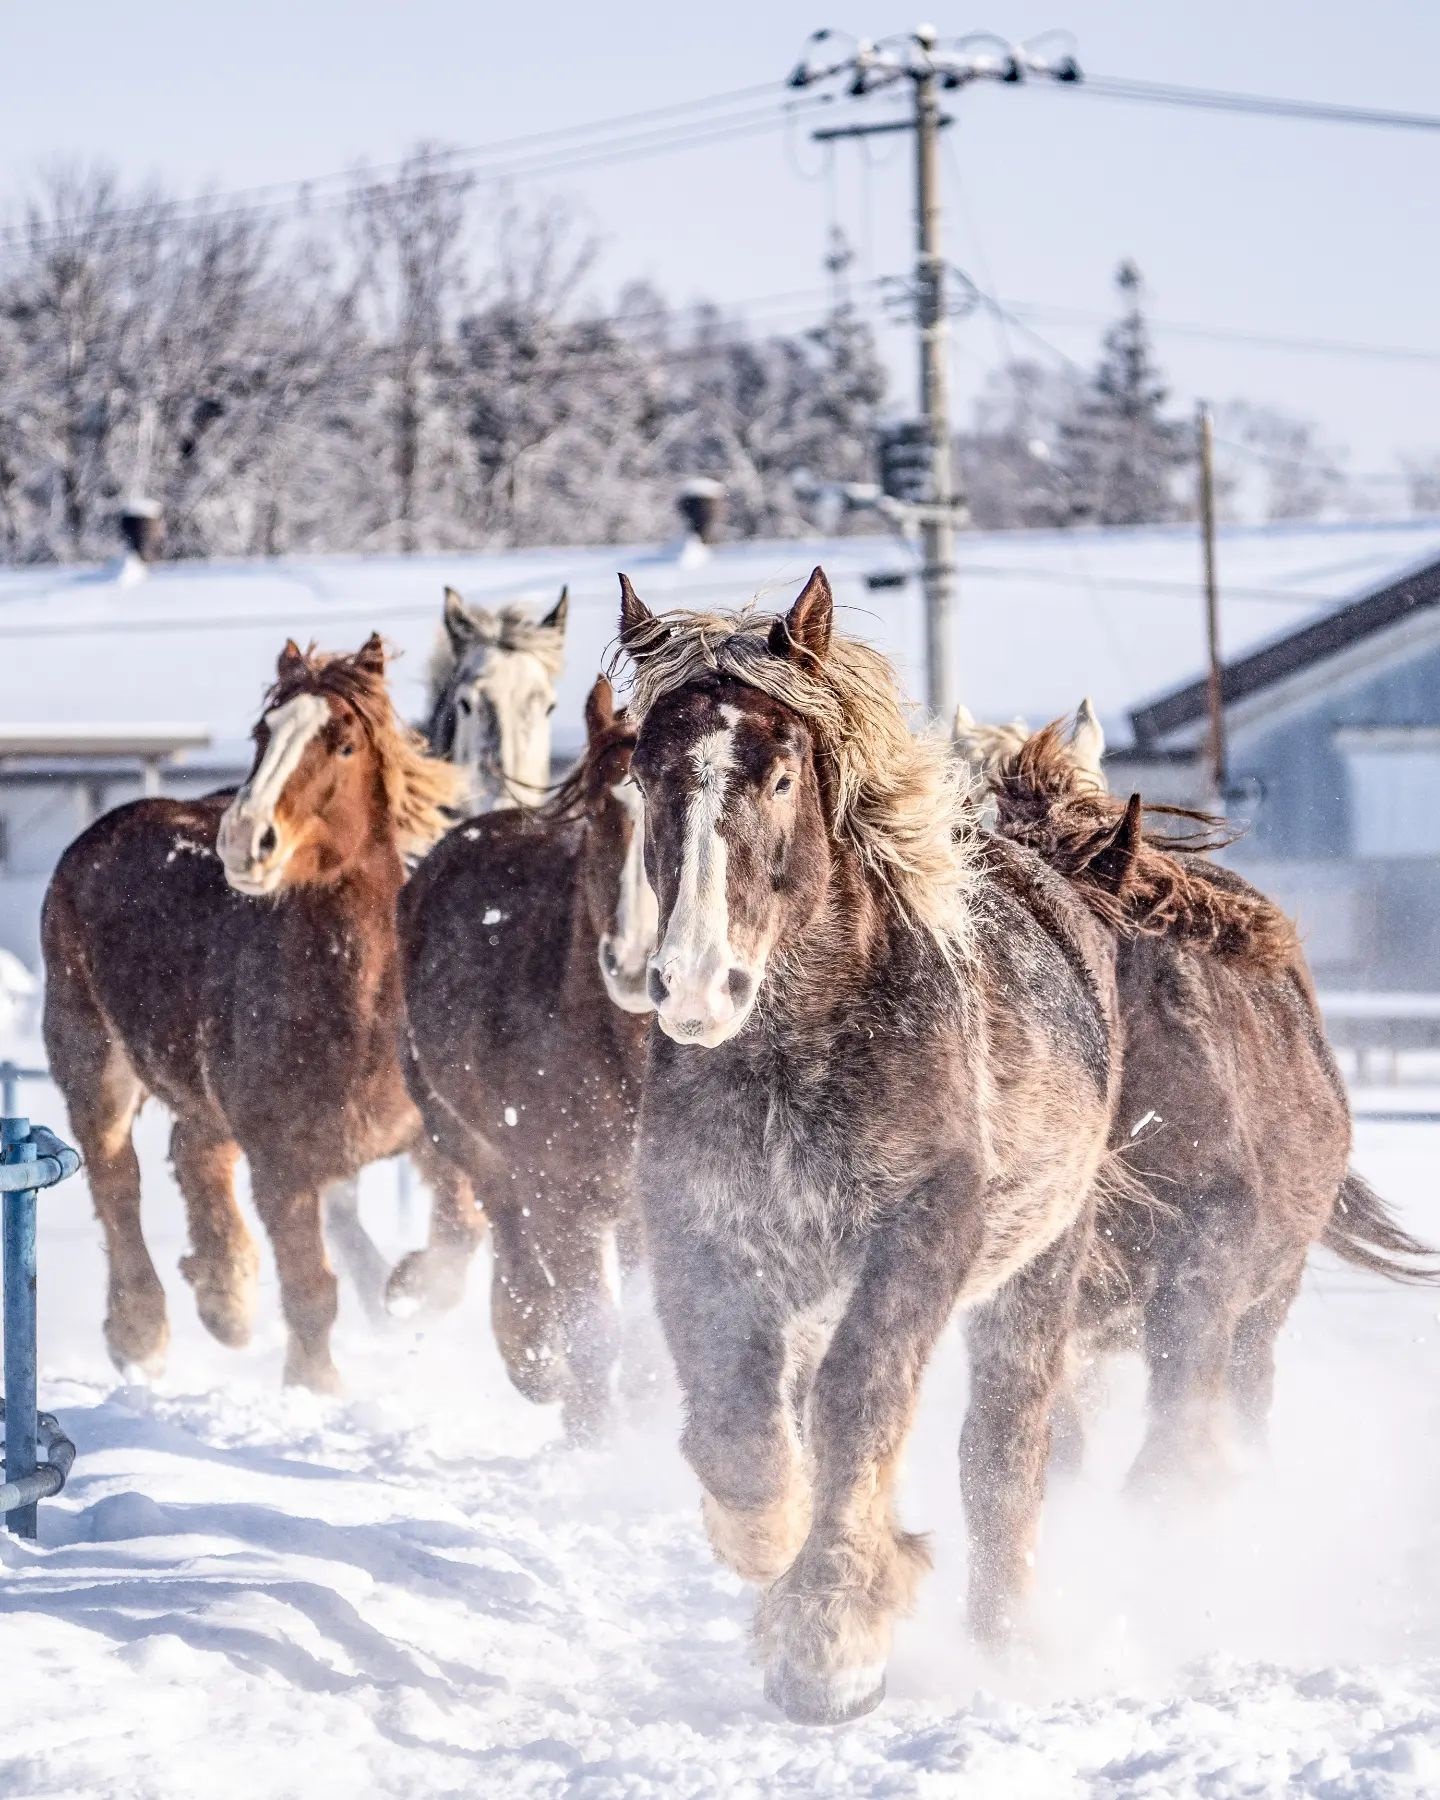 Horses running on the snow